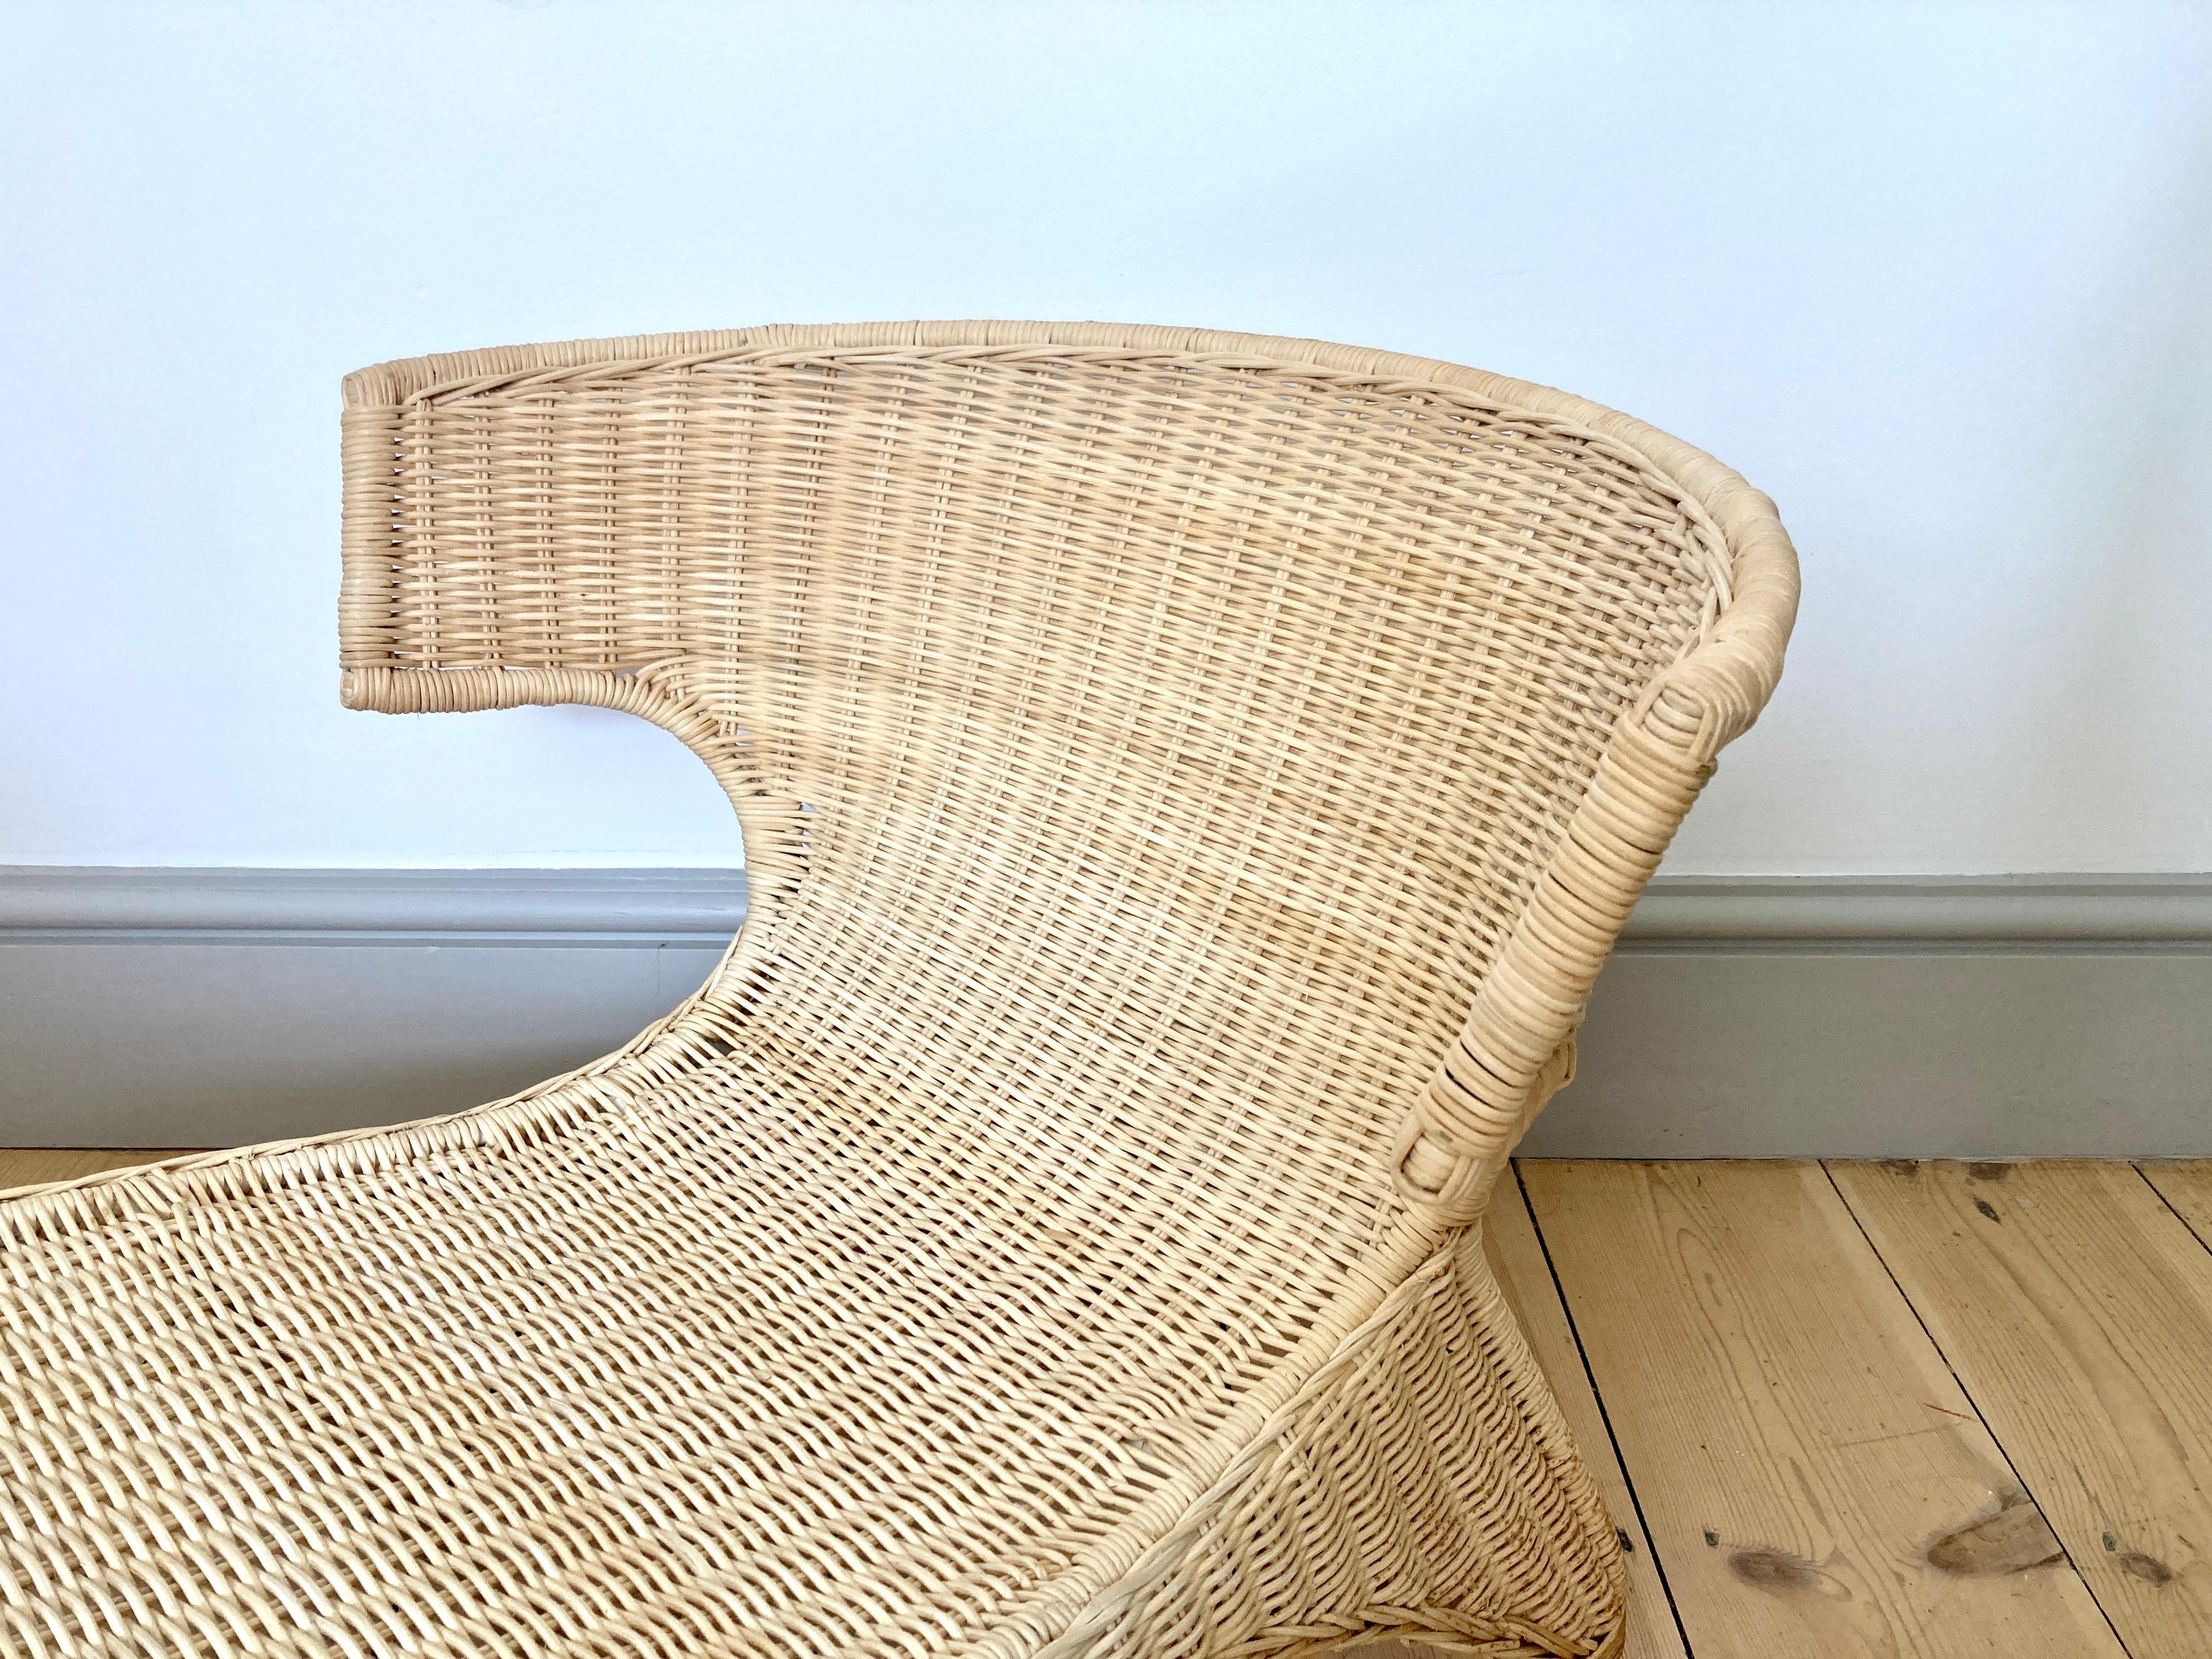 Steel Low Lounge Chair / Chaise Longue by Monika Mulder for Ikea Savo Natural Rattan